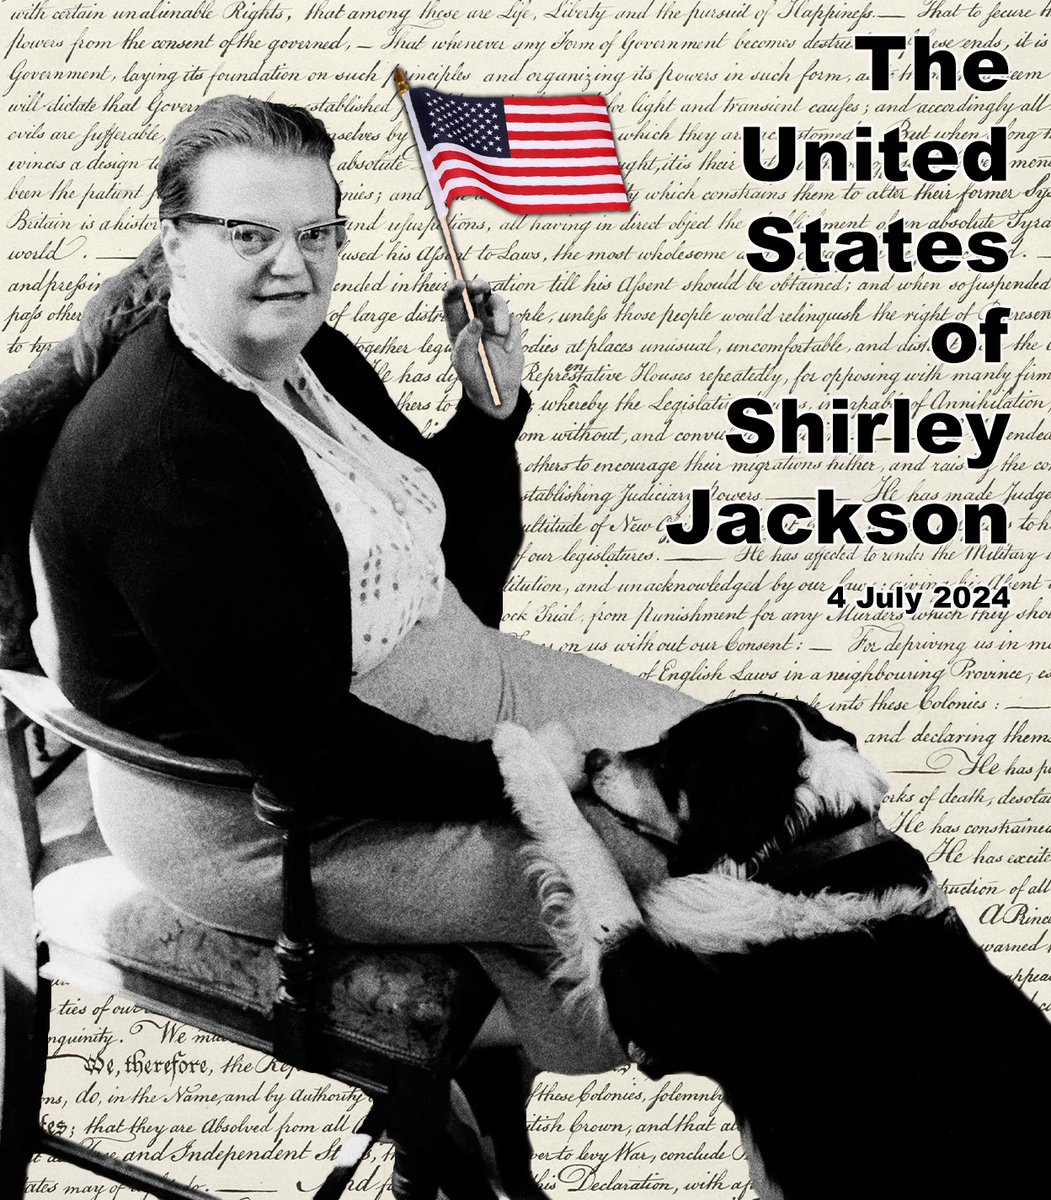 Save the Date! 'Reading Shirley Jackson in the 21st Century' 3 will take place this 4th of July. It should be a hybrid event, with an in-person element at Trinity College Dublin. Expect a CFP in the coming weeks, with info here or at …irleyjackson21stcentury.wordpress.com
#ShirleyJackson